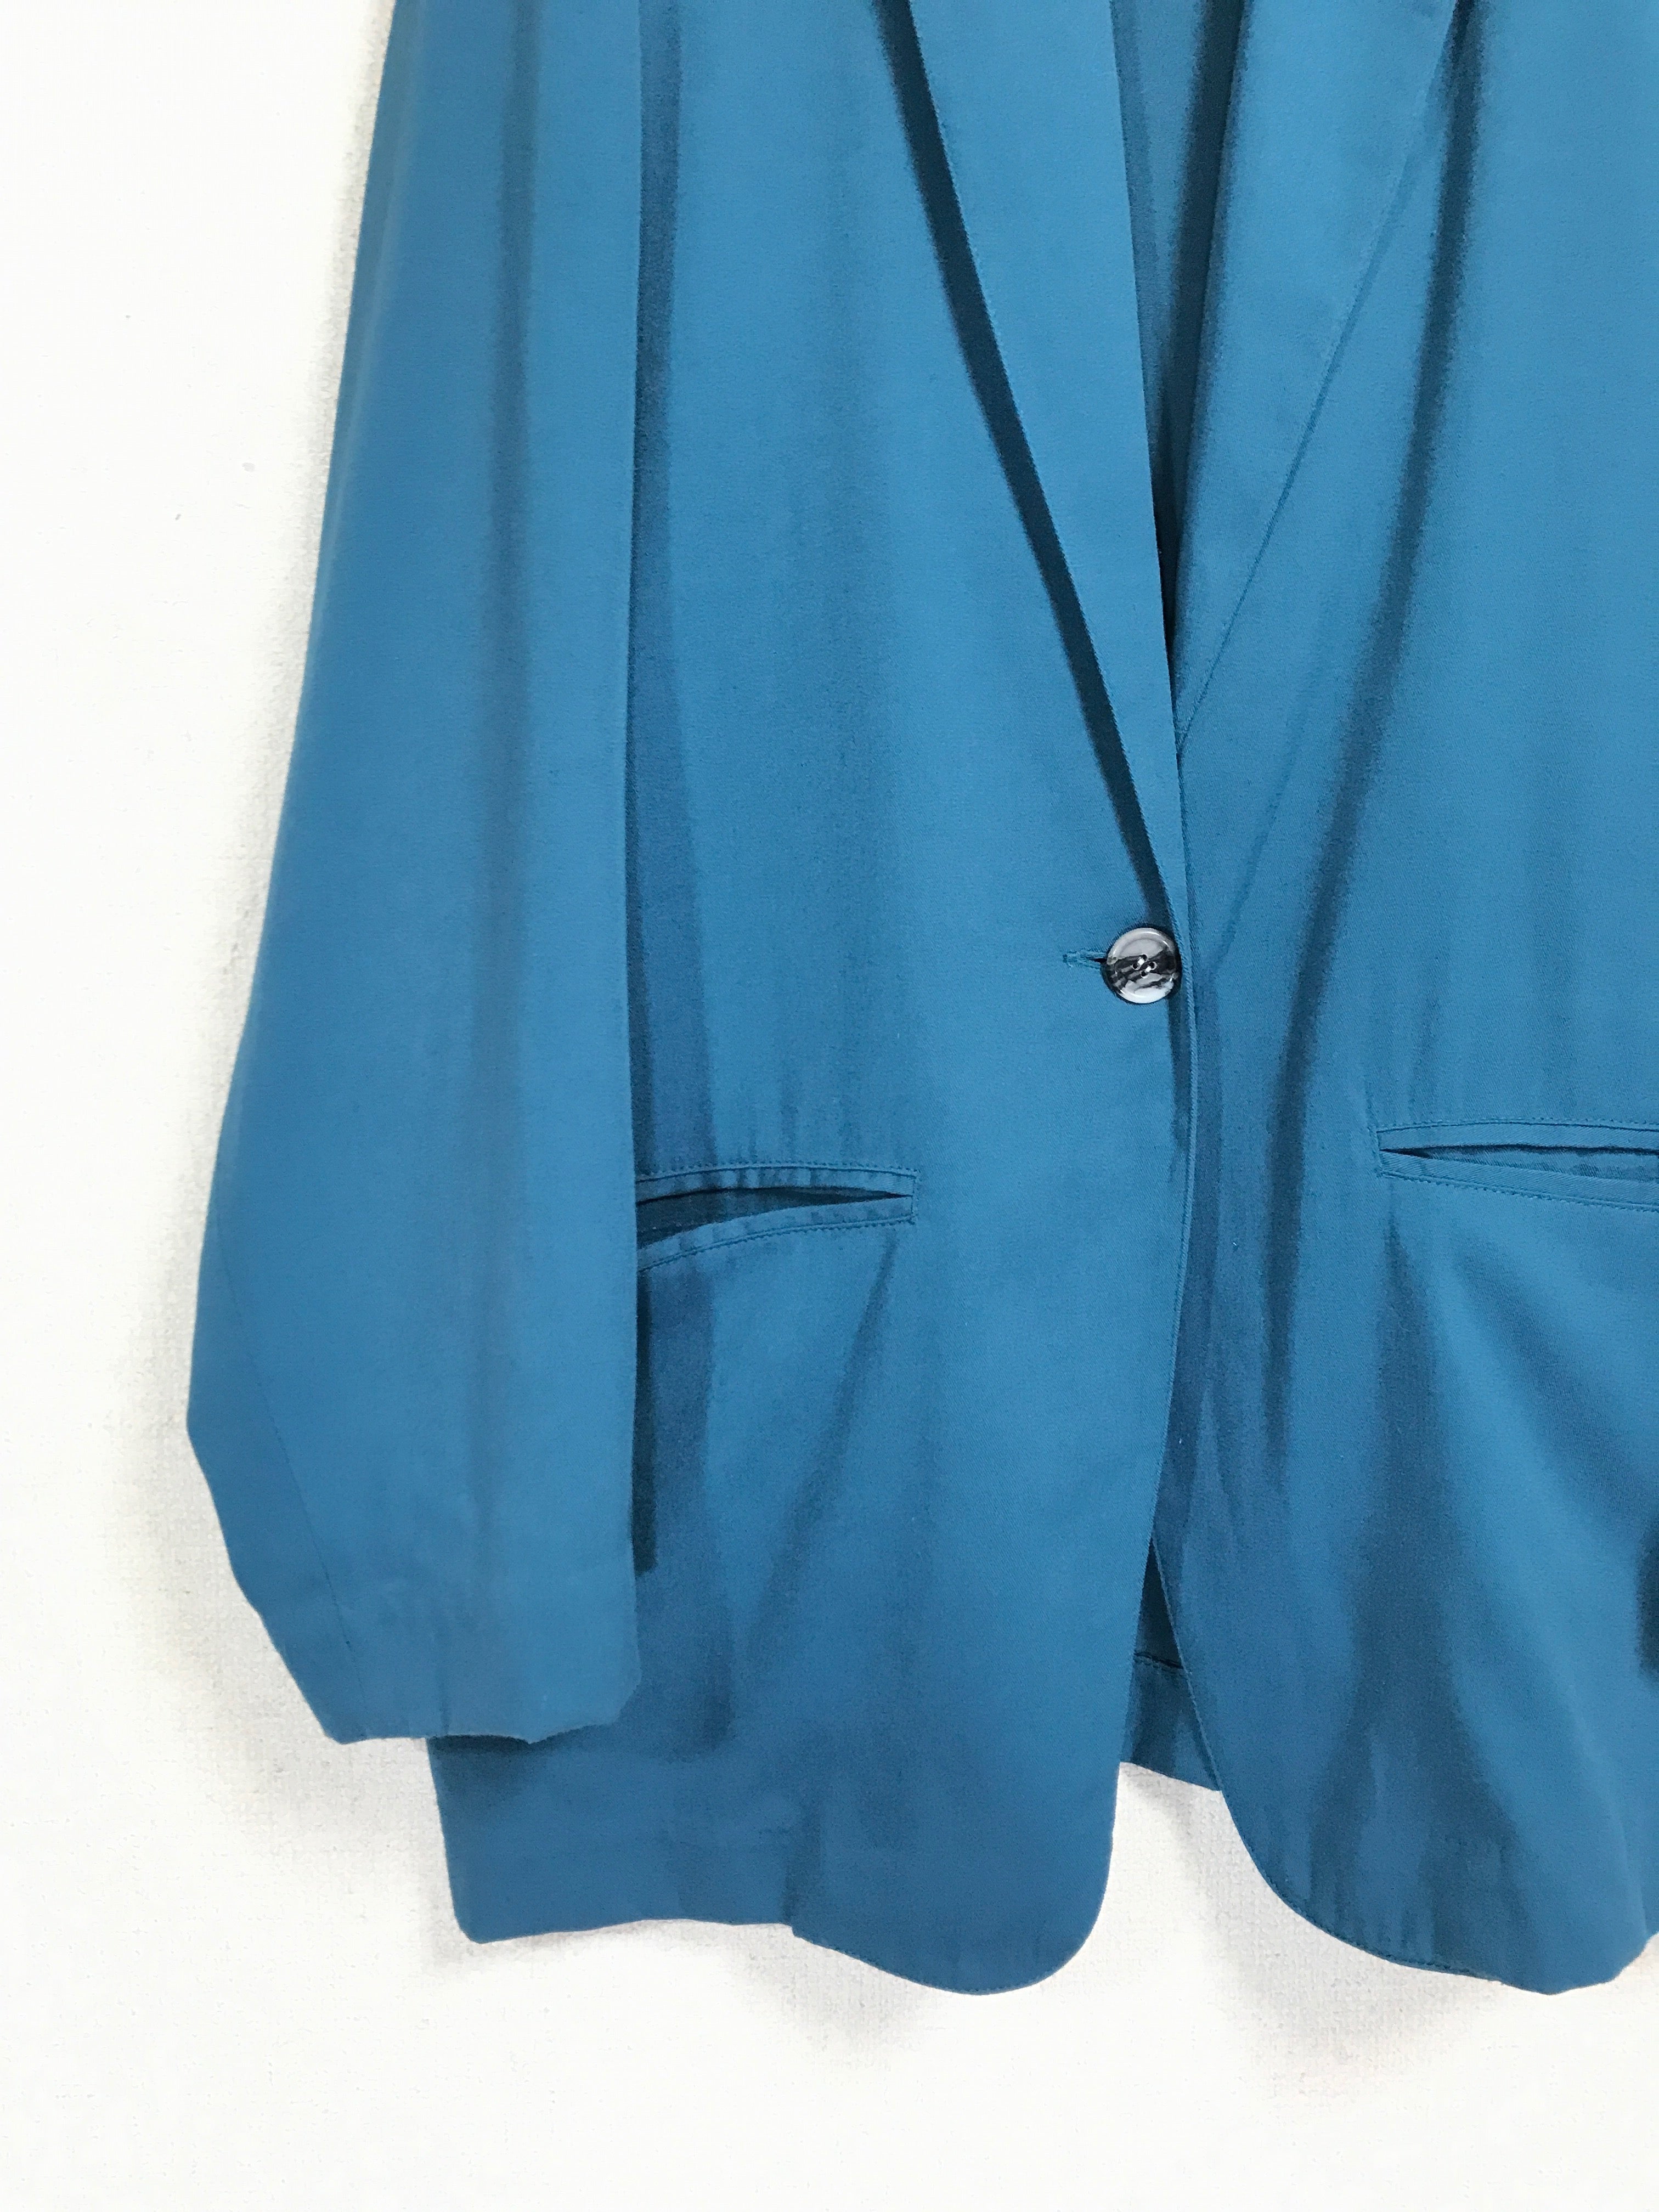 90's rayon/polyester jacket&trouser 2 pieces